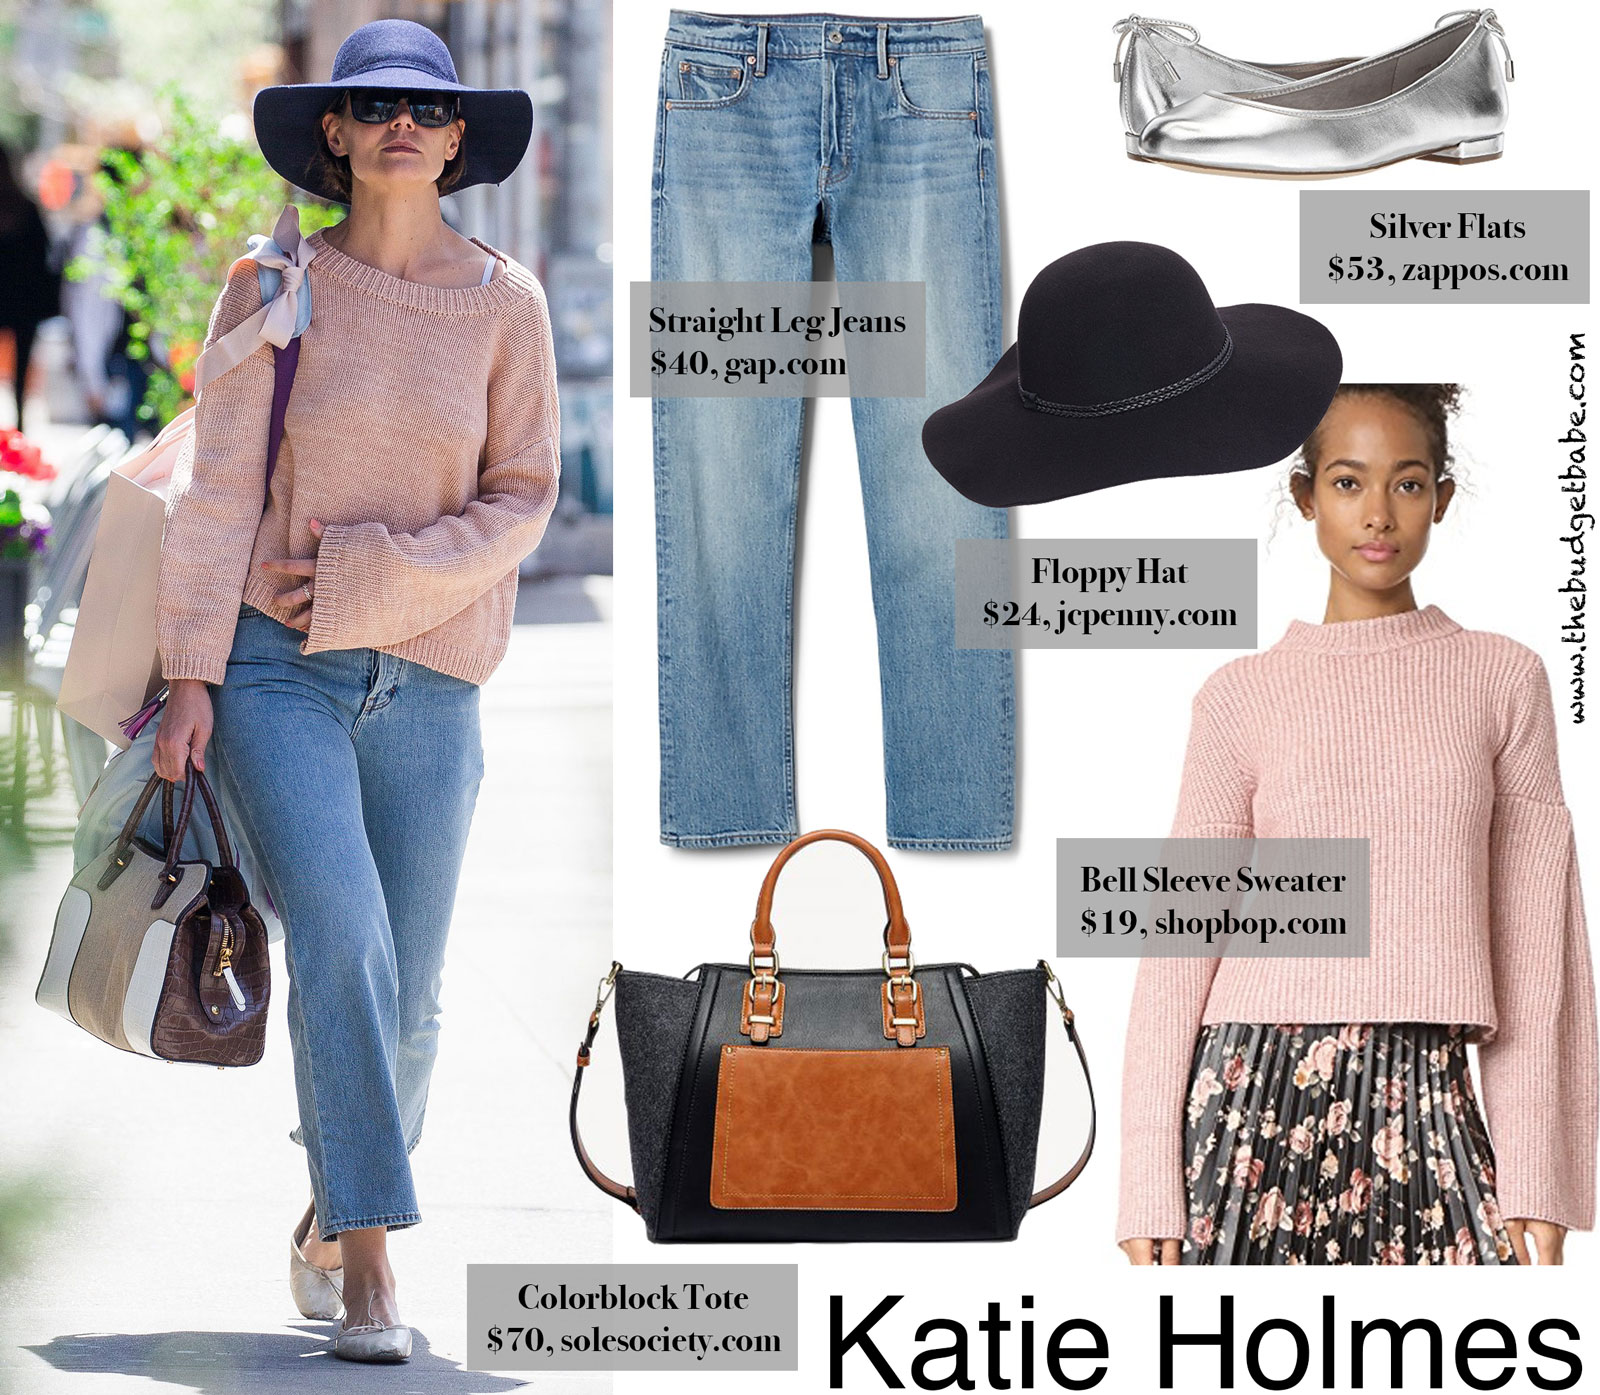 Katie Holmes Floppy Hat and Bell Sleeve Sweater Look for Less